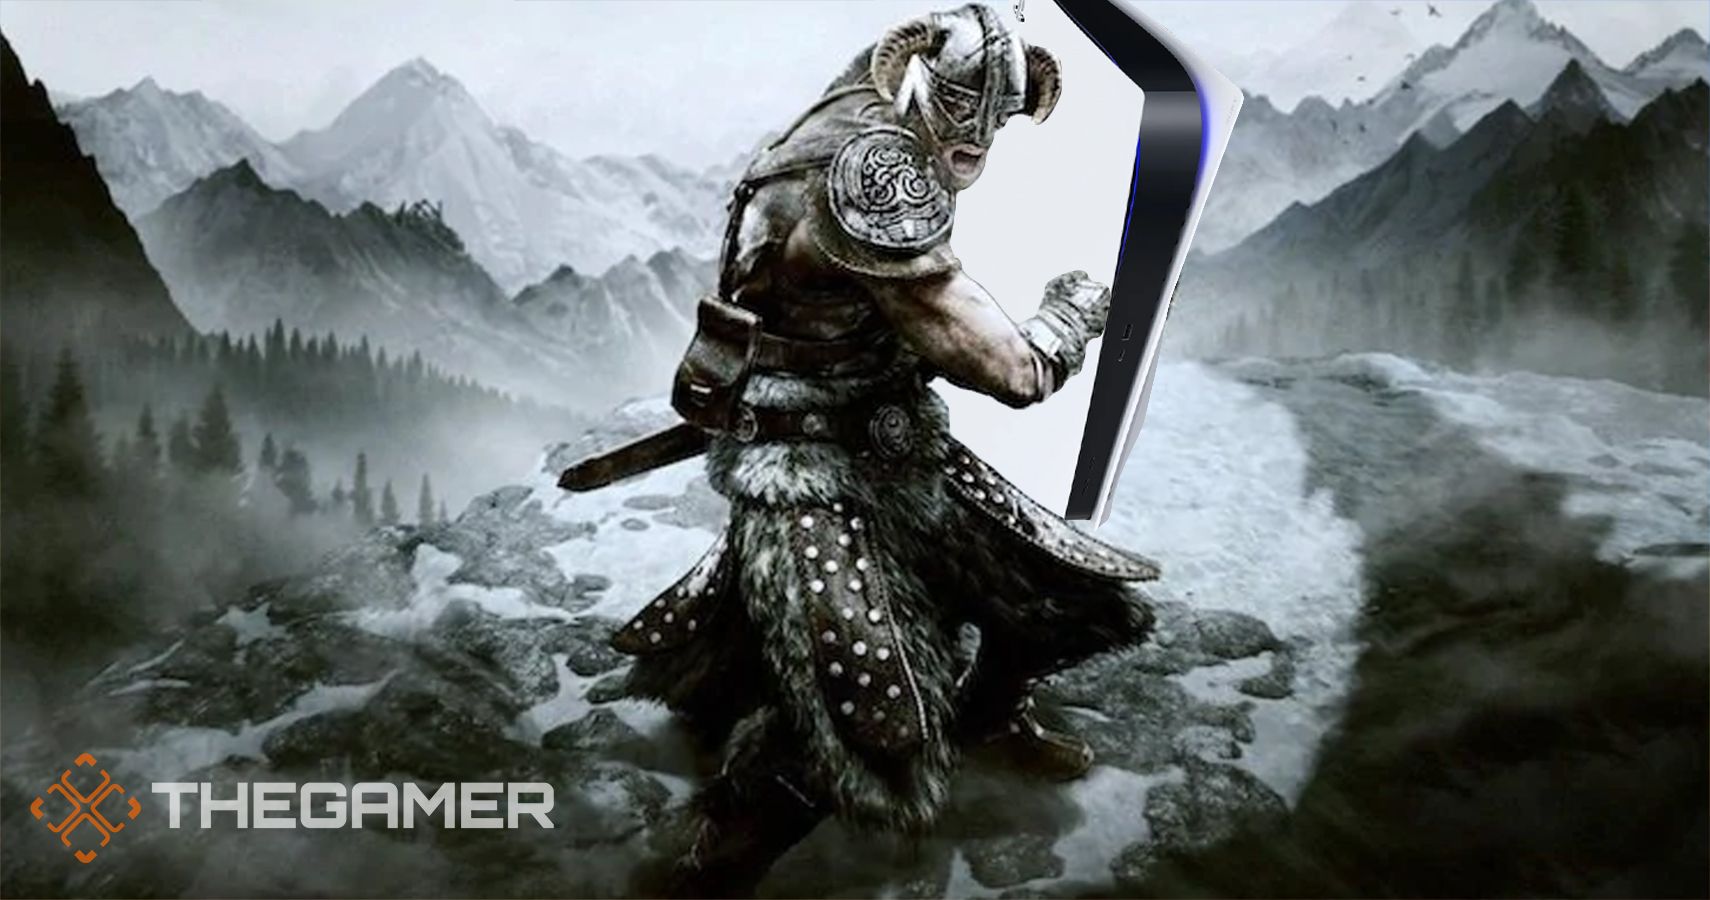 Skyrim Mod Makes It Playable At 60fps On PS5 With Trophies Enabled